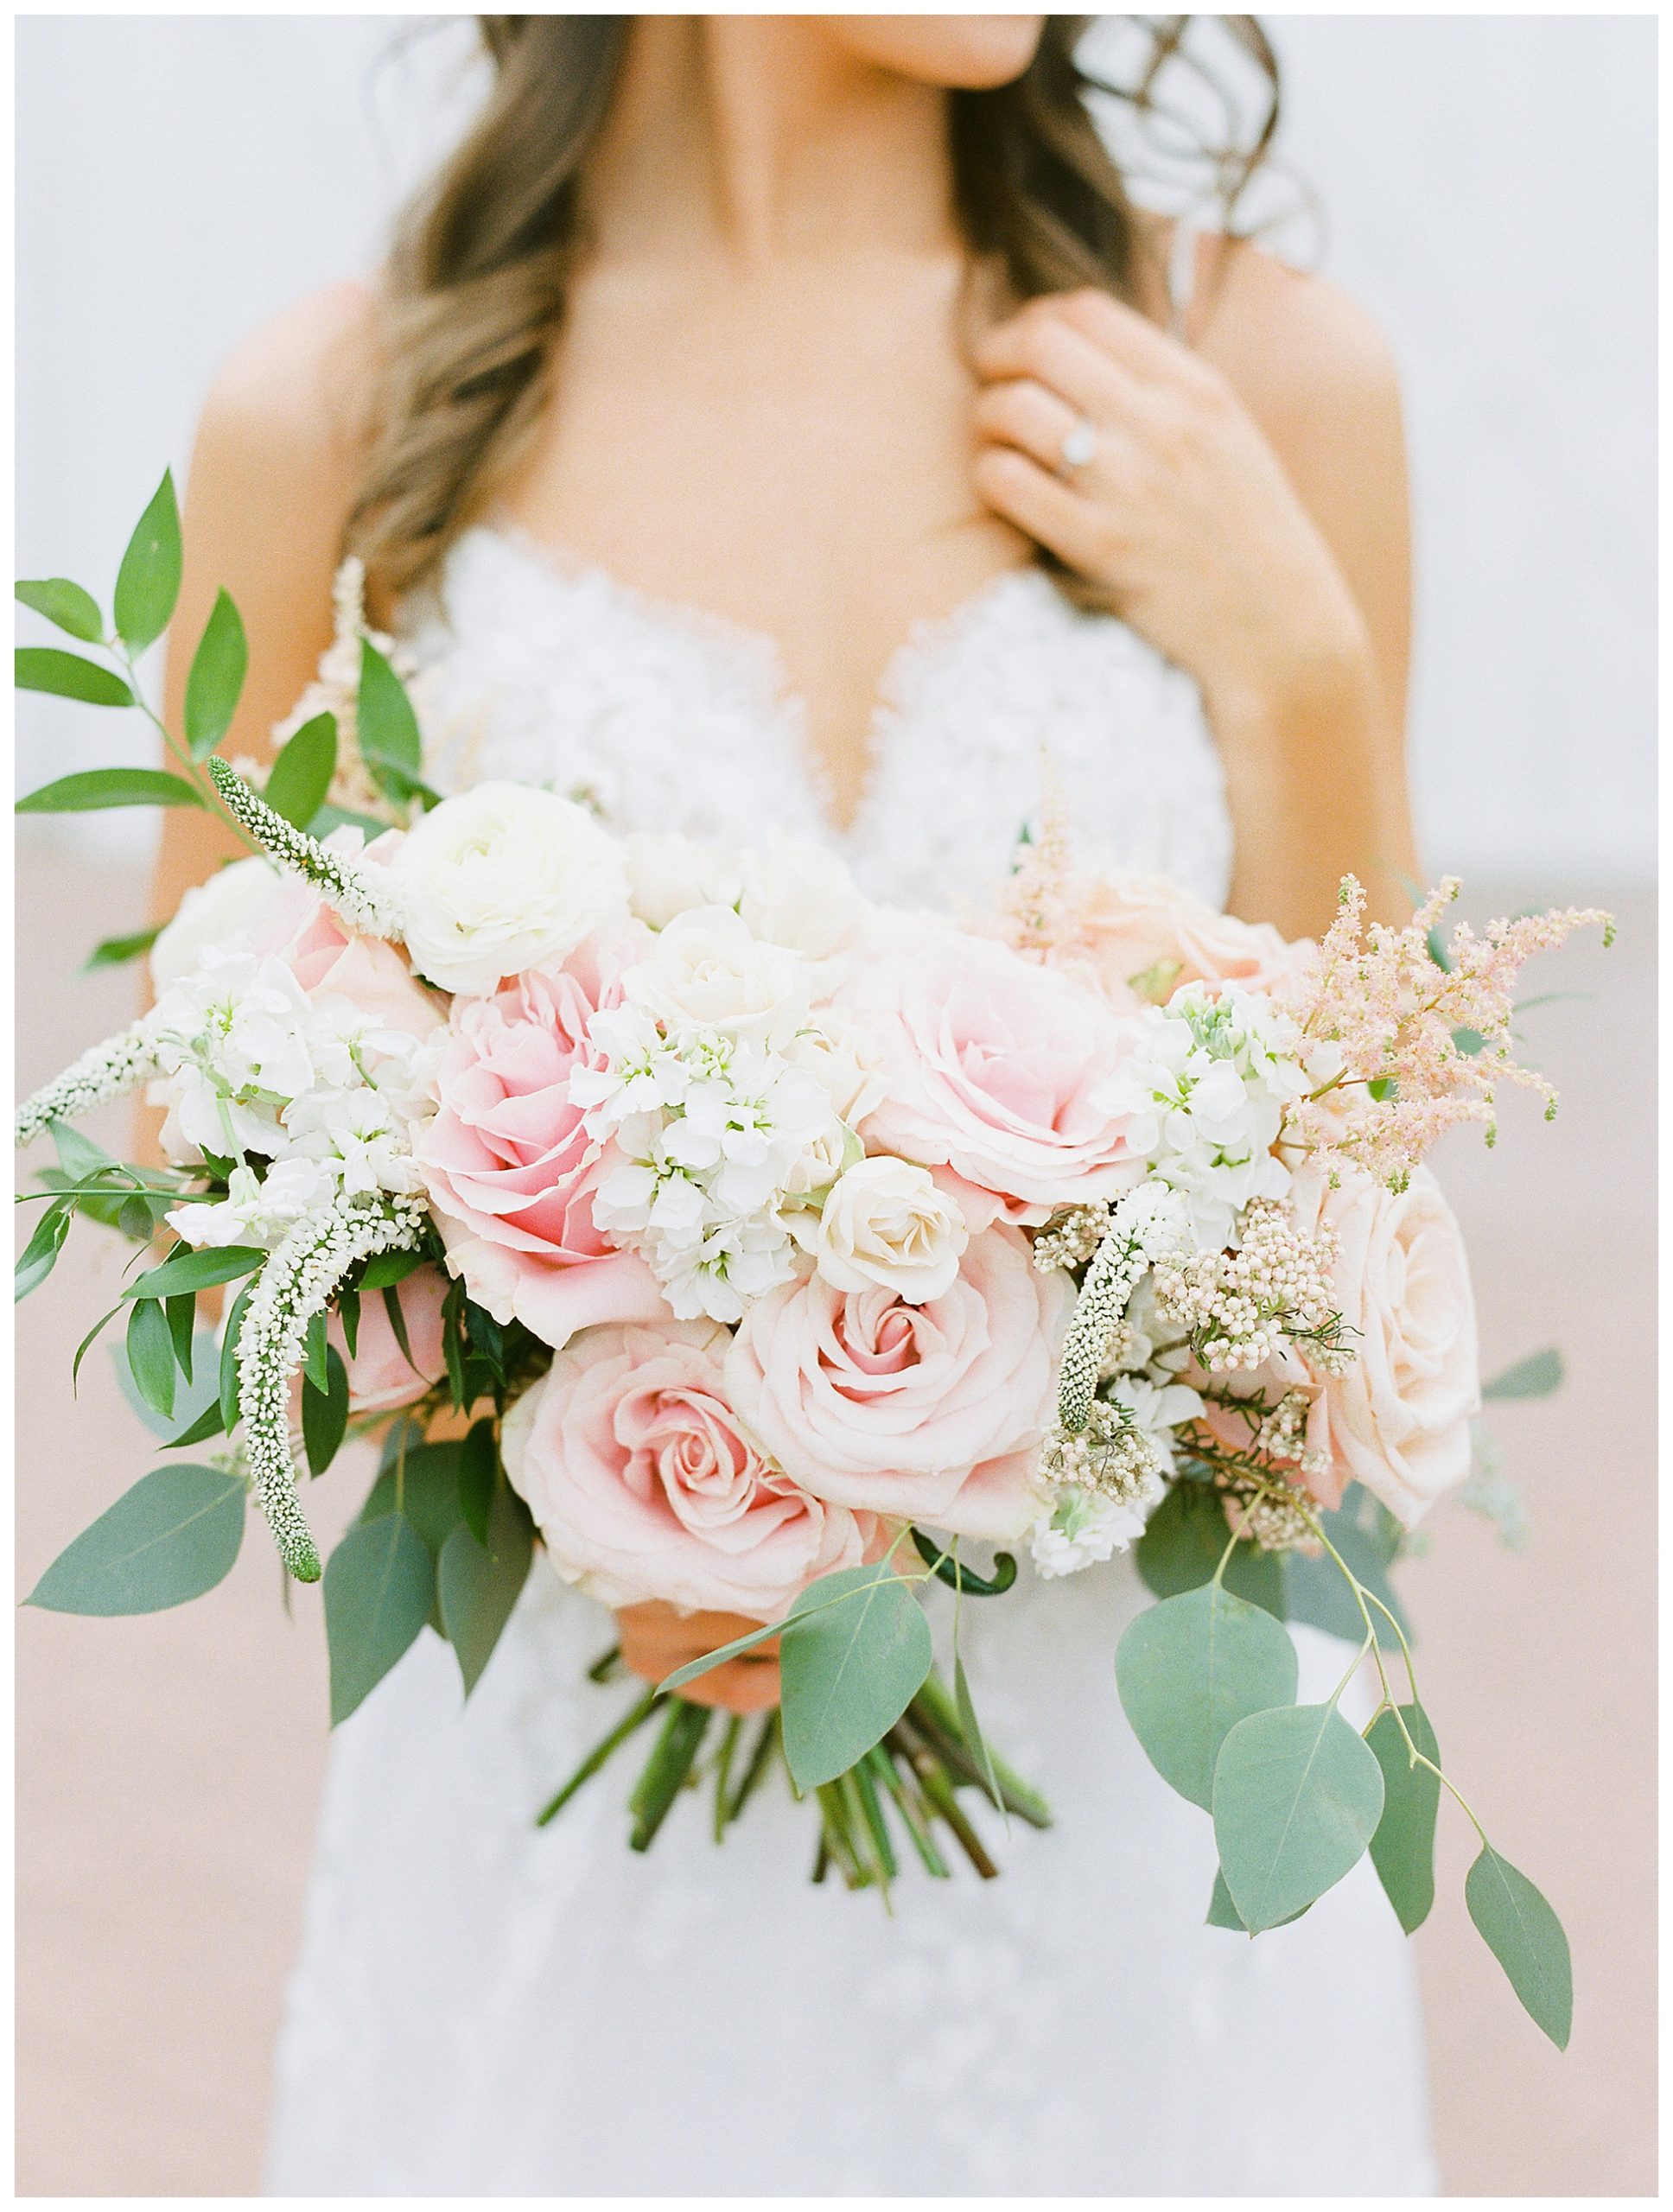 Bride holding wedding bouquet at White Sparrow barn